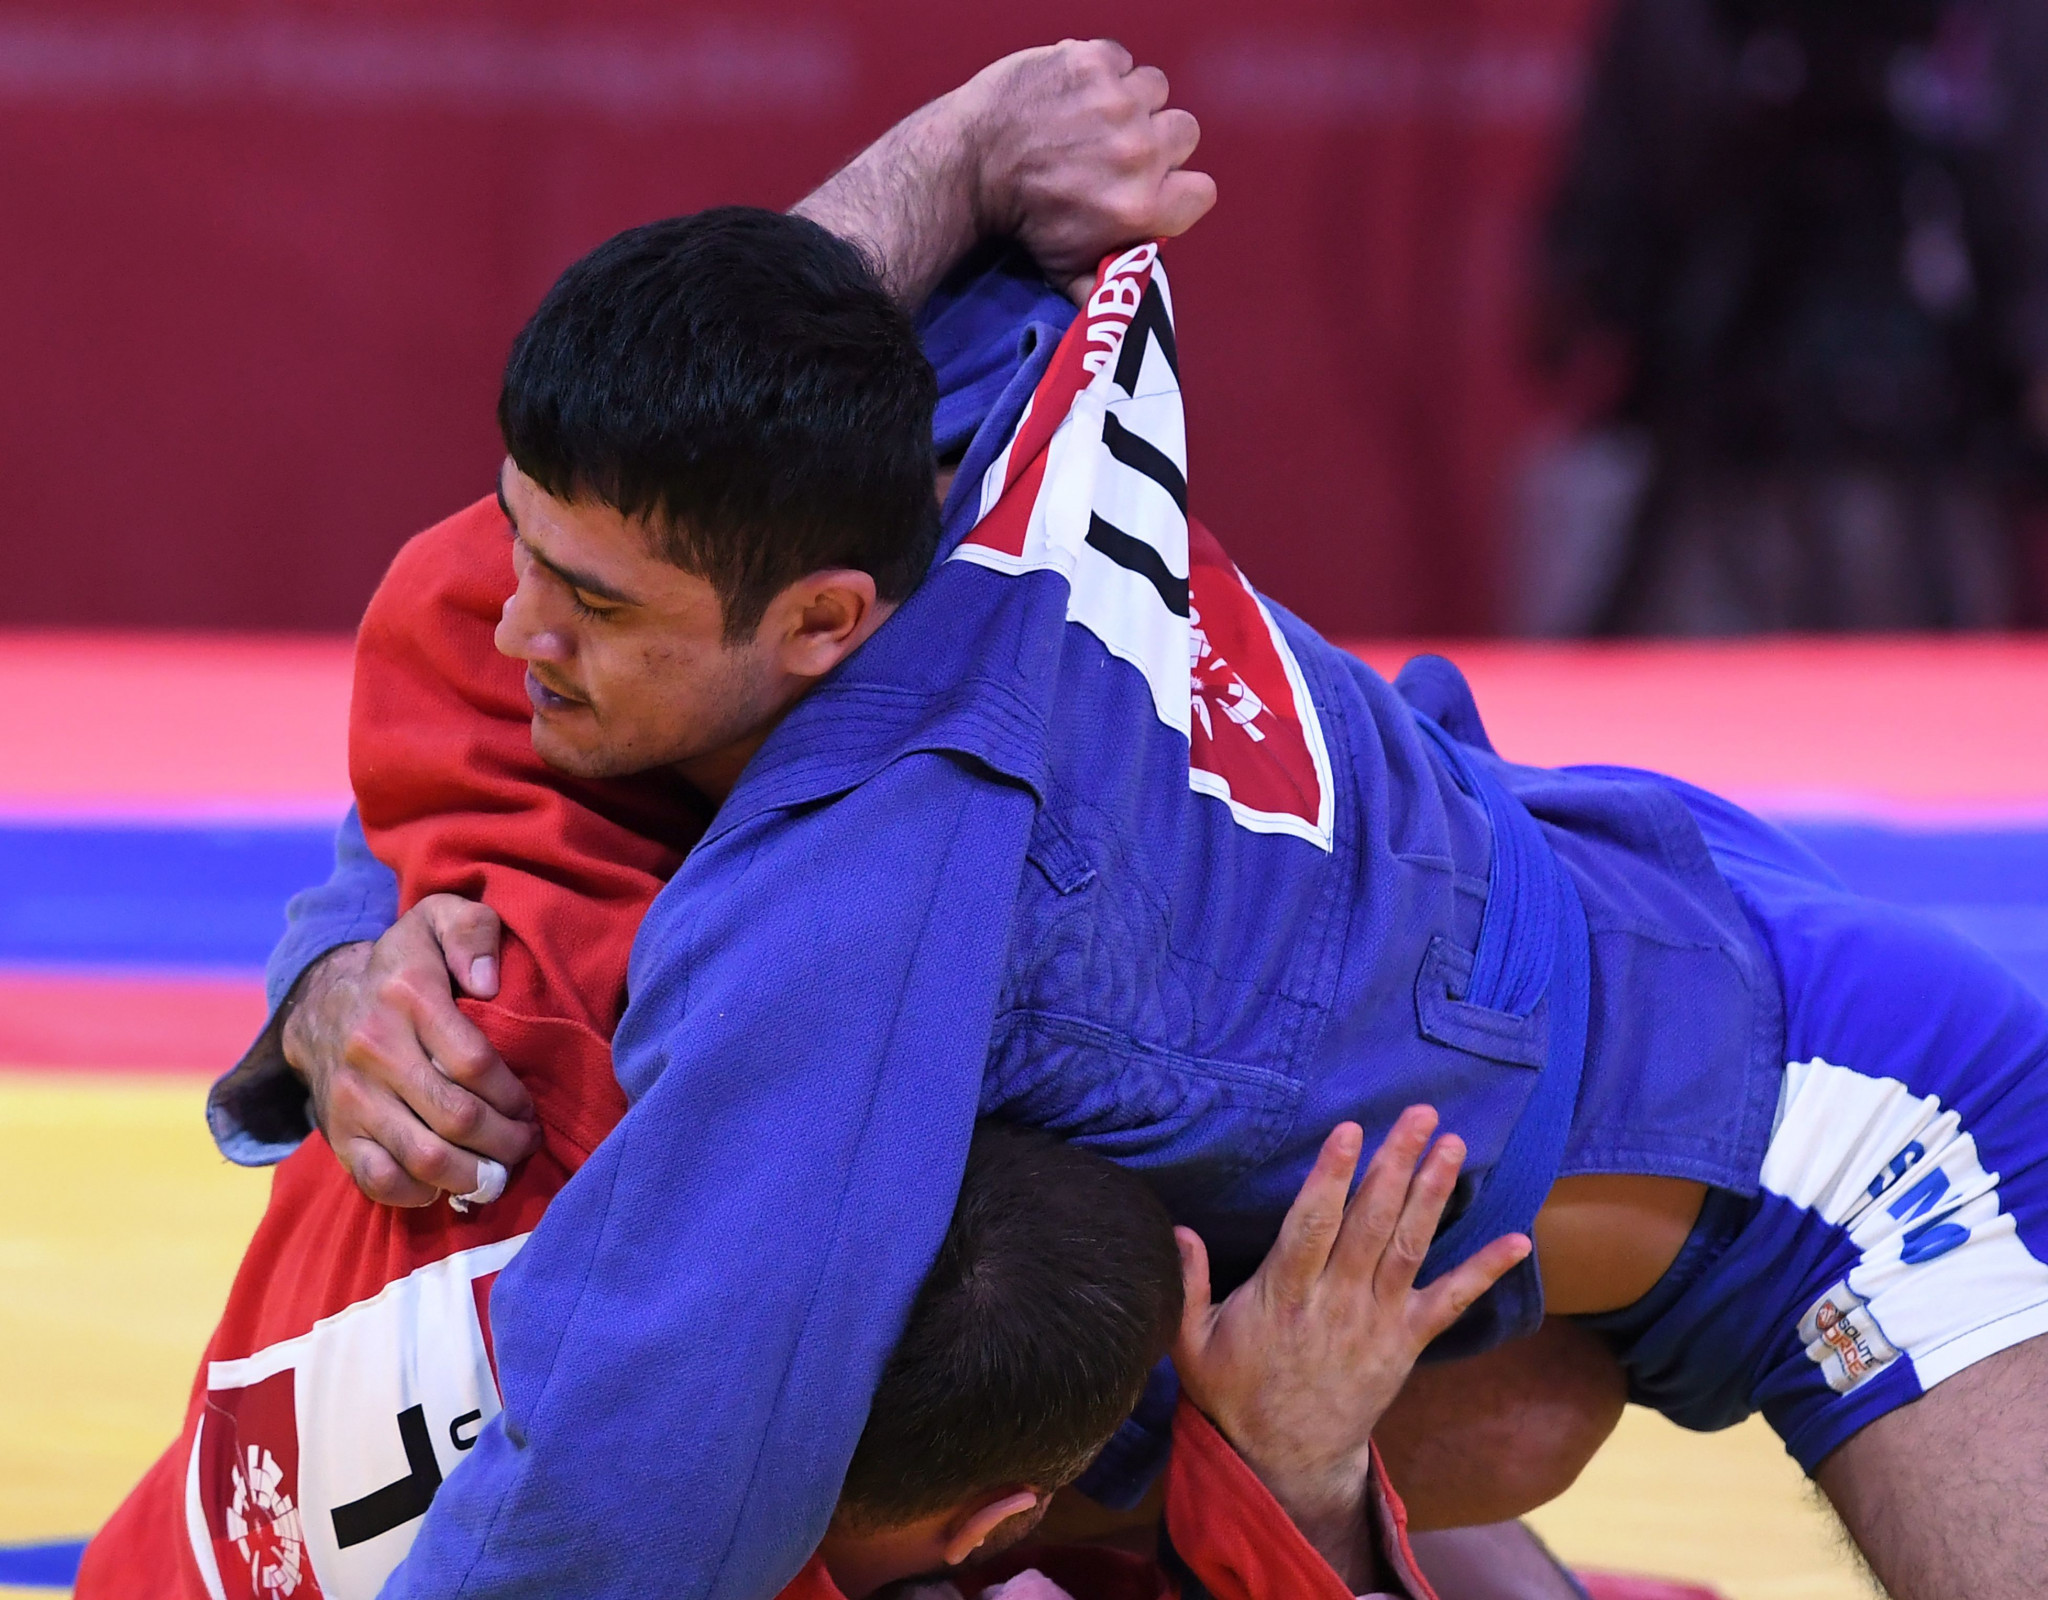 World Sambo Championships moved from Moscow following sanctions against Russia